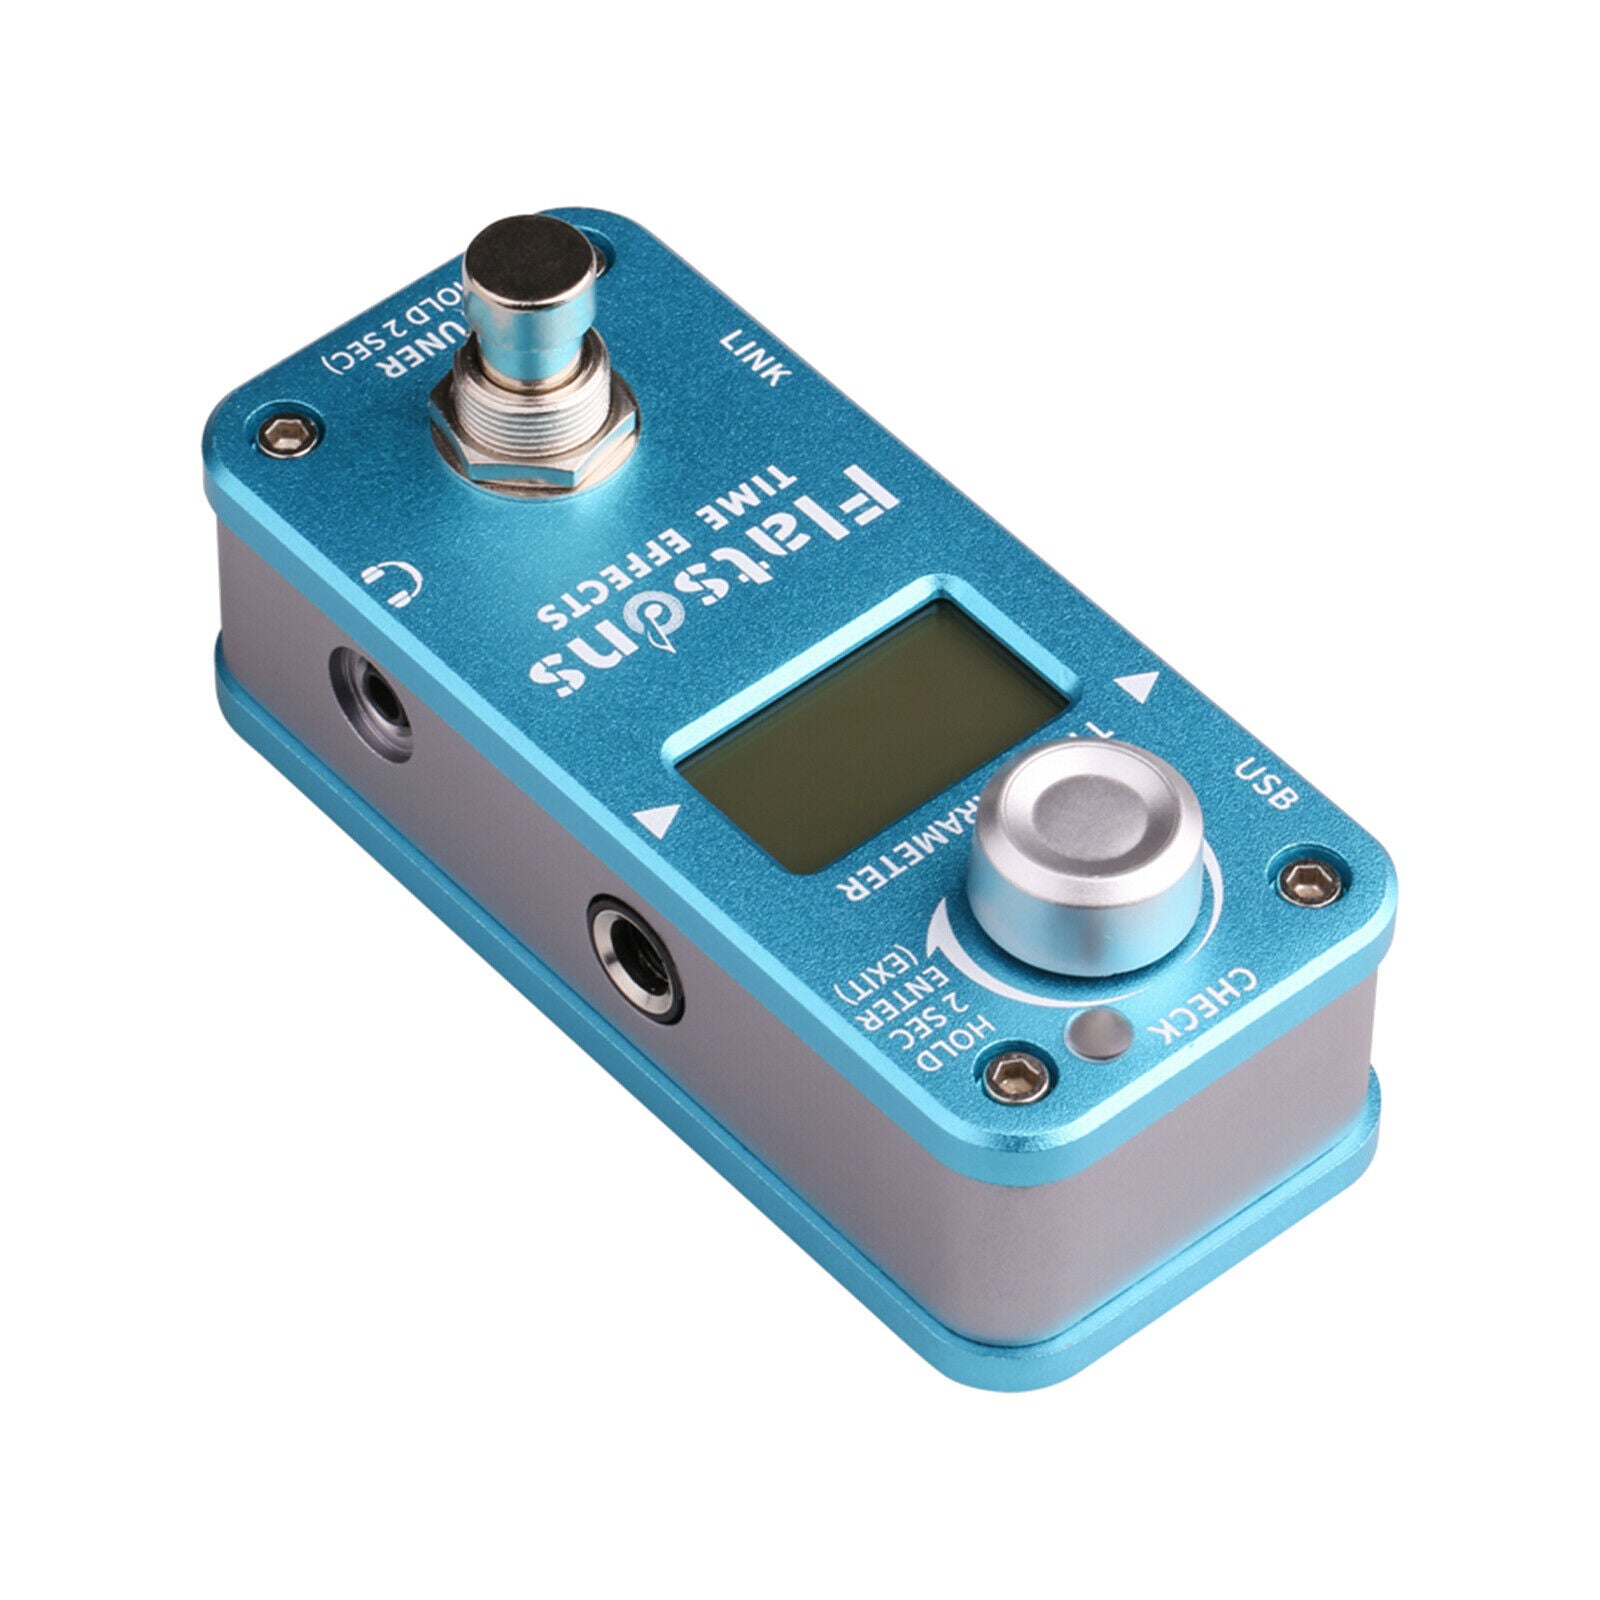 Guitar Effect Pedal LED Indicator Hardware Pass-Through with Tuning Function